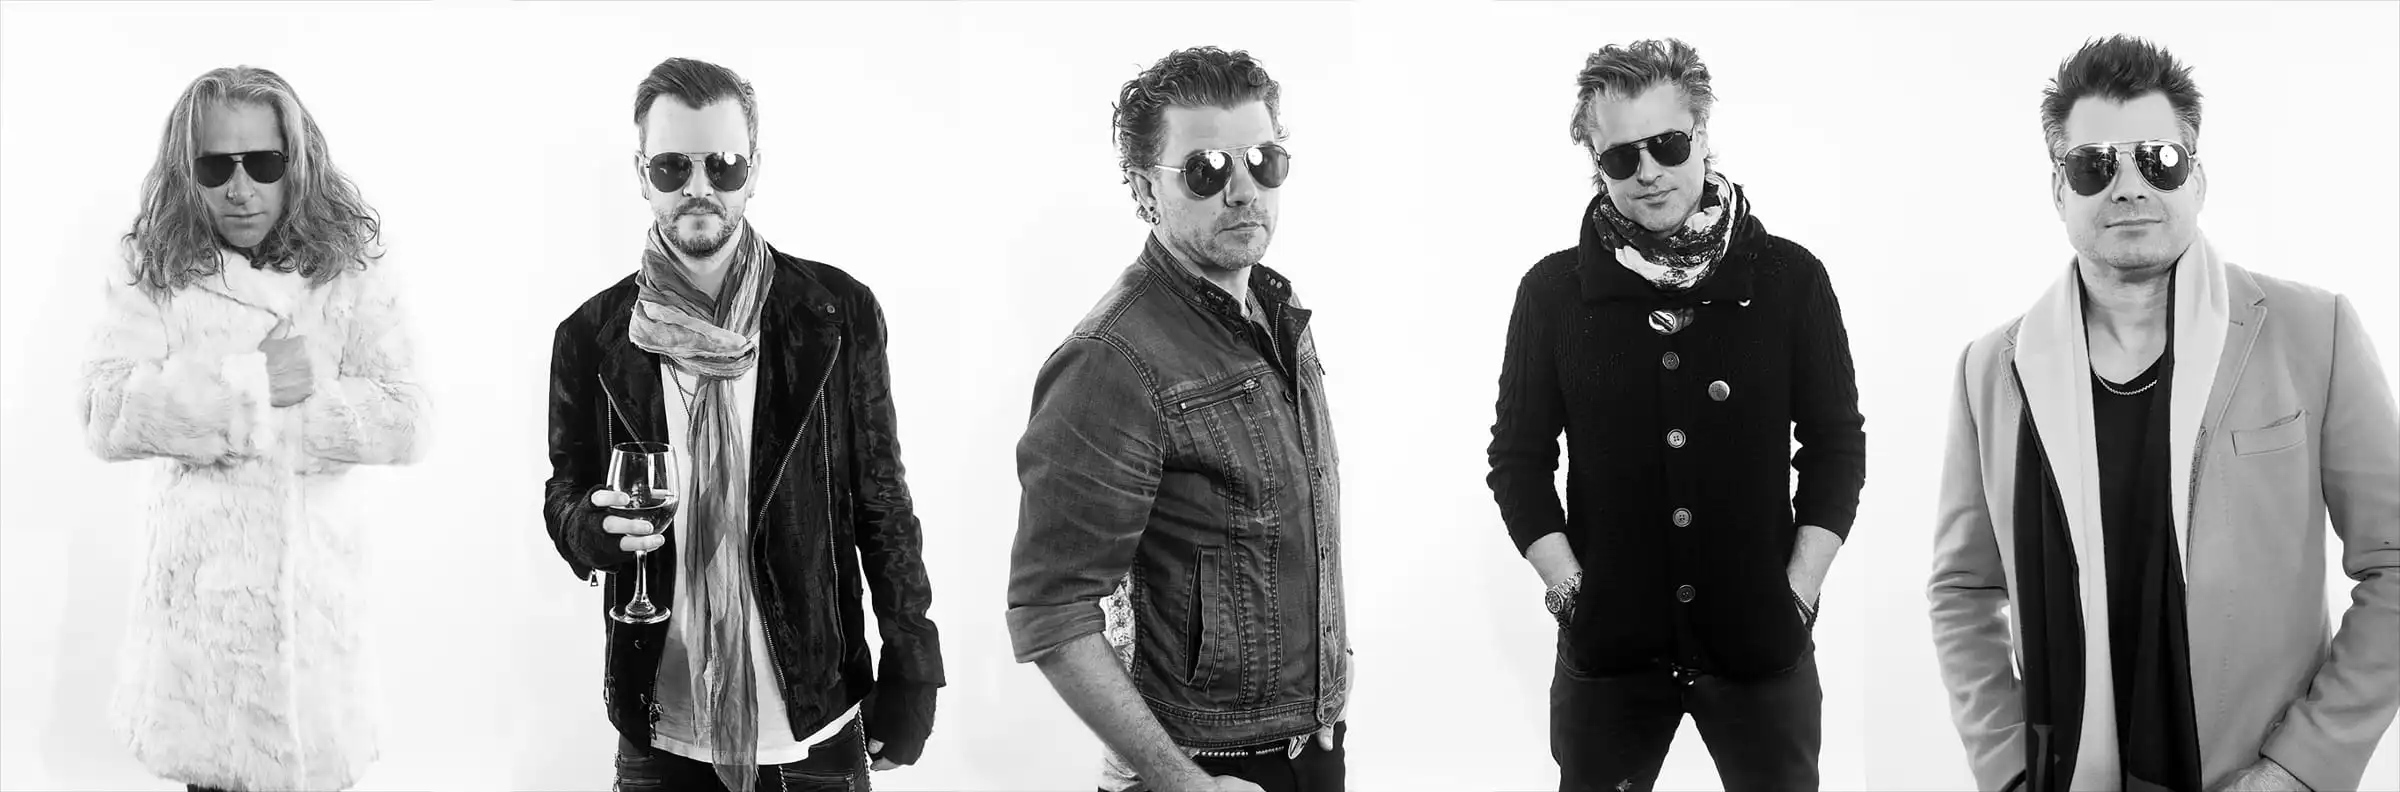 Collective Soul Shares Details of ‘Half & Half’ EP and Band Dynamics After 25 Years